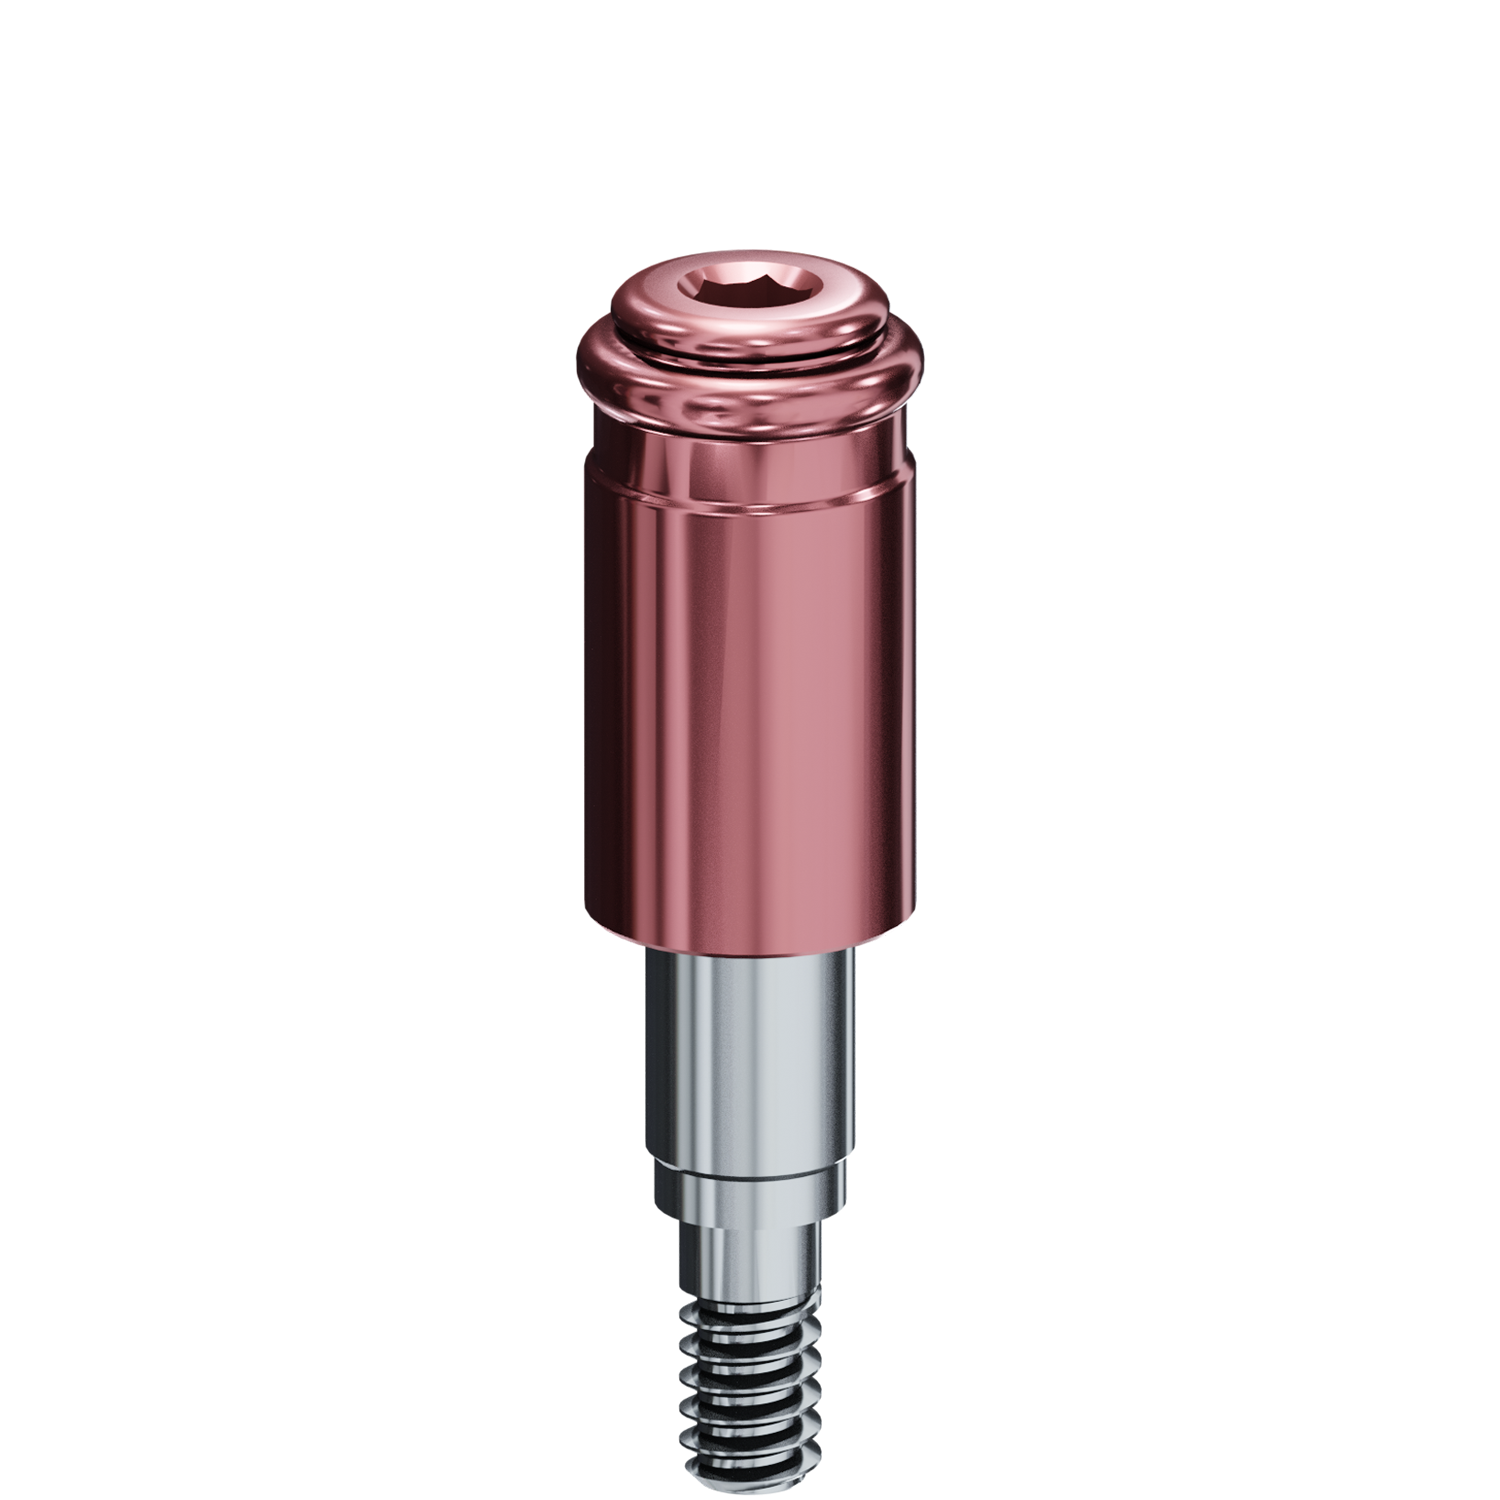 R-Tx Attachment System - 3.4mm Biomet 3i® Certain Connection - 048" Drive - 4.0mm